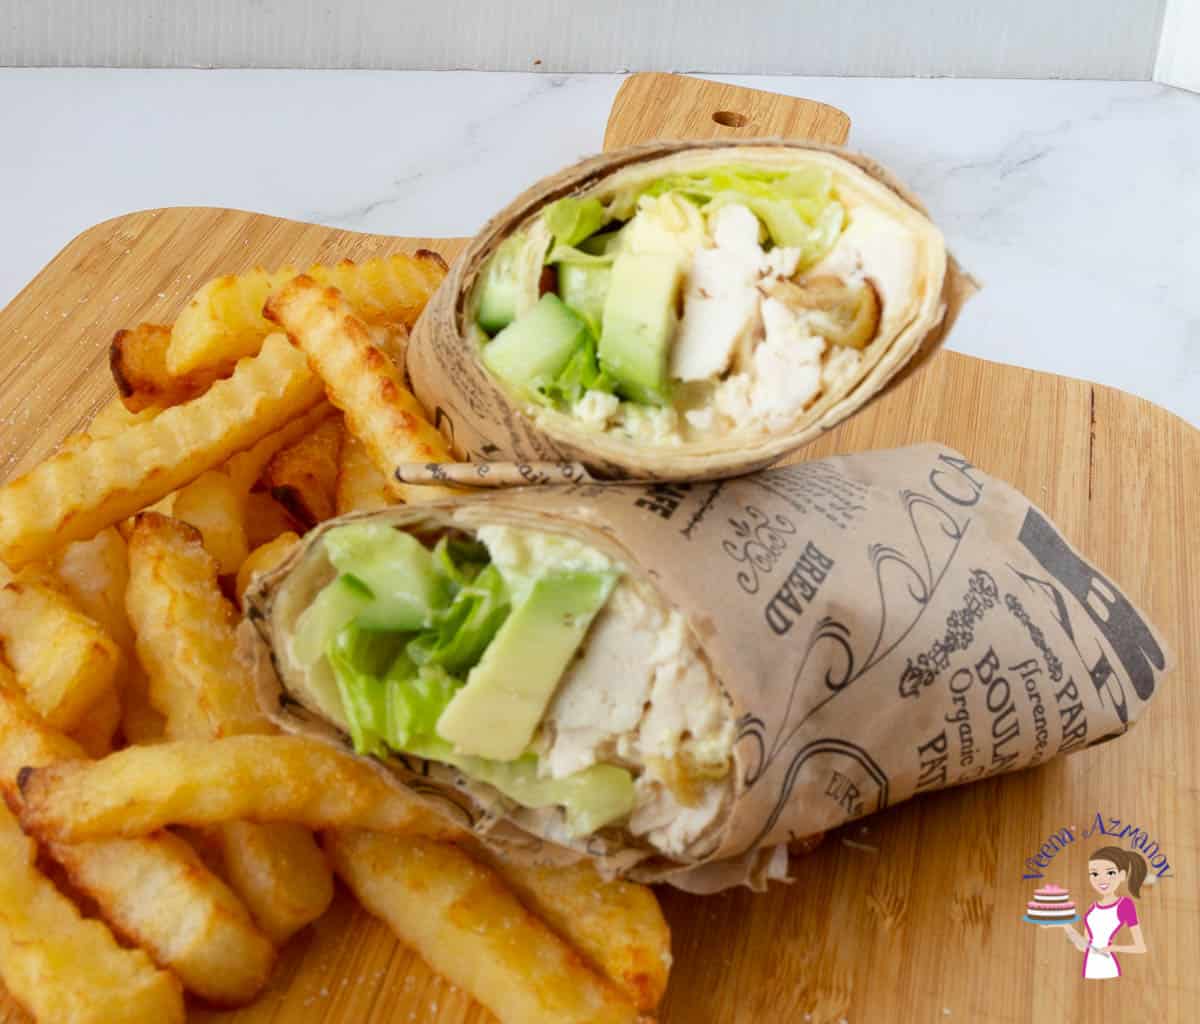 A chicken wrap on a wooden board